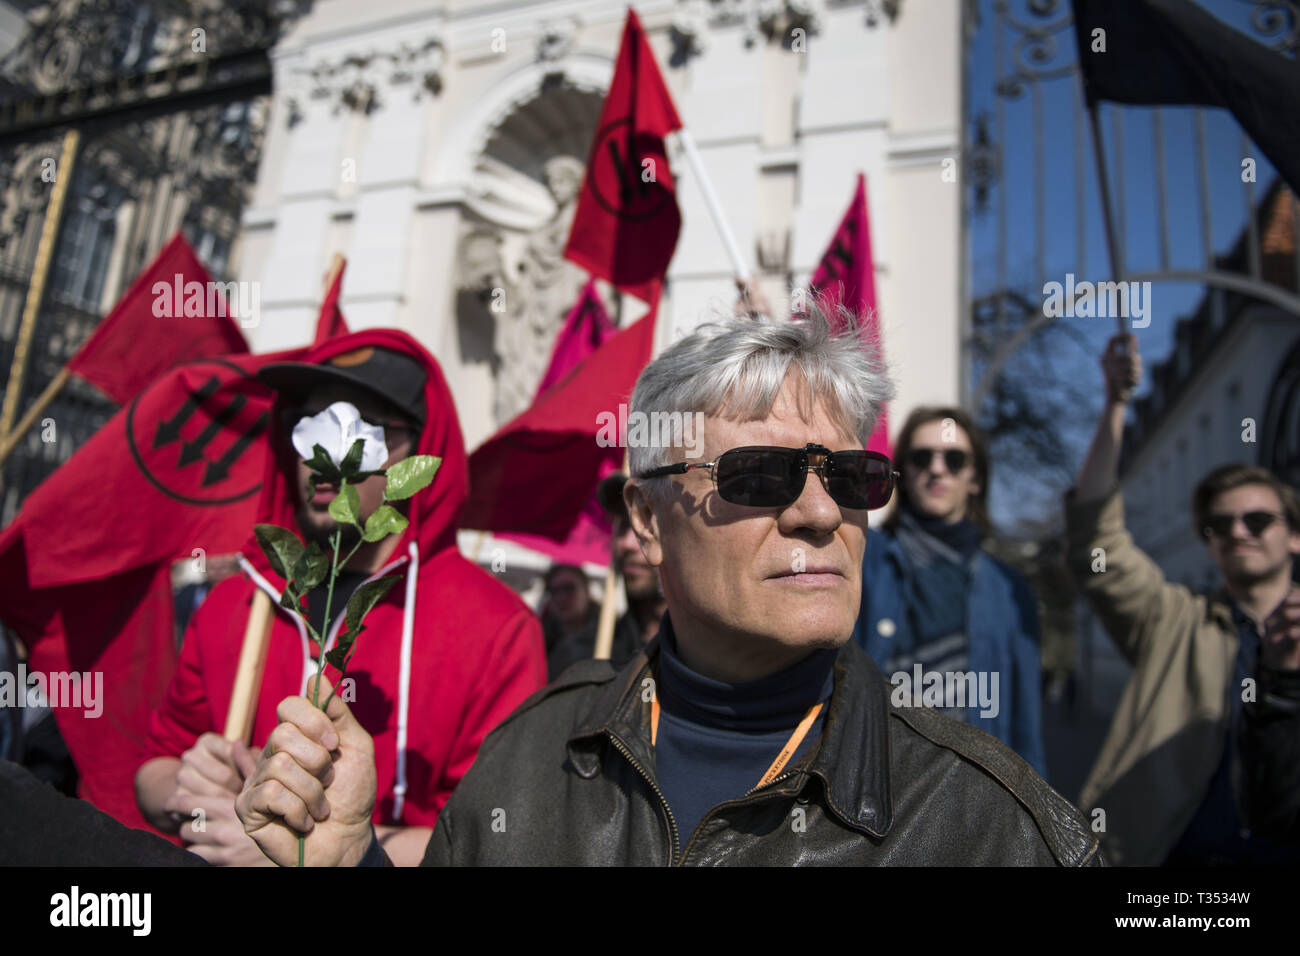 Warsaw, Mazowieckie, Poland. 6th Apr, 2019. An antifascist seen holding a white rose during the protest.''Universities free from Marxism'' a protest against the Warsaw University to express their opposition to the activity of leftist extremists and other cases of left-wing indoctrination of Polish students. In the same place, students, leftist and anti-fascist activists gathered under the slogan ''Here we learn, do not heil''. Both groups were separated by a large police cordon. Credit: Attila Husejnow/SOPA Images/ZUMA Wire/Alamy Live News Stock Photo